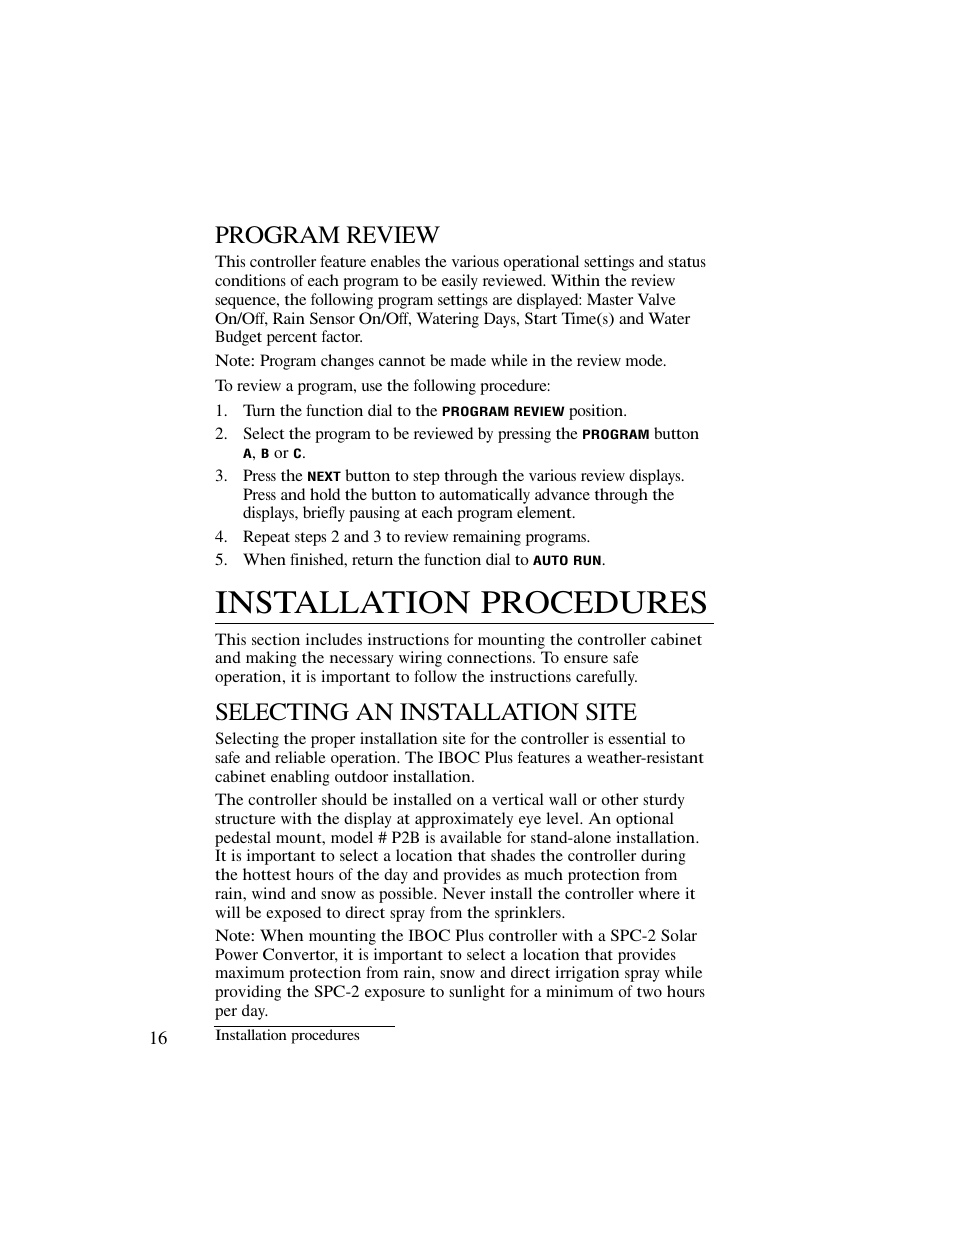 Installation procedures, Program review, Selecting an installation site | Irritrol IBOC-Plus User Manual | Page 18 / 28